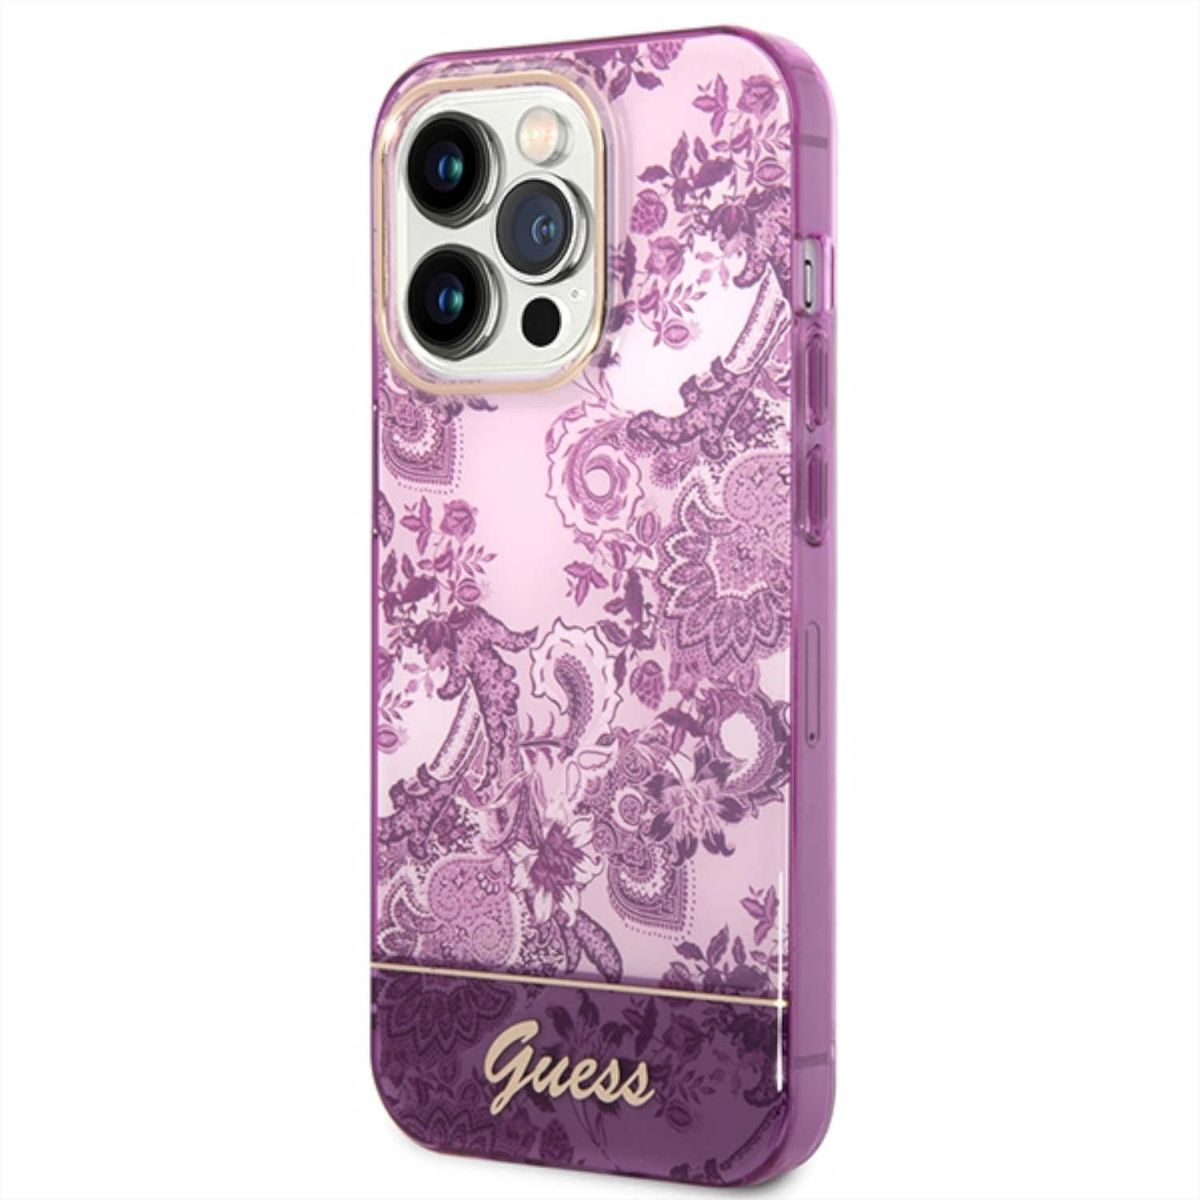 GUESS Design Muster TPU / PC Apple, Backcover, Leder / PU iPhone Lila Pro, Hülle, 14